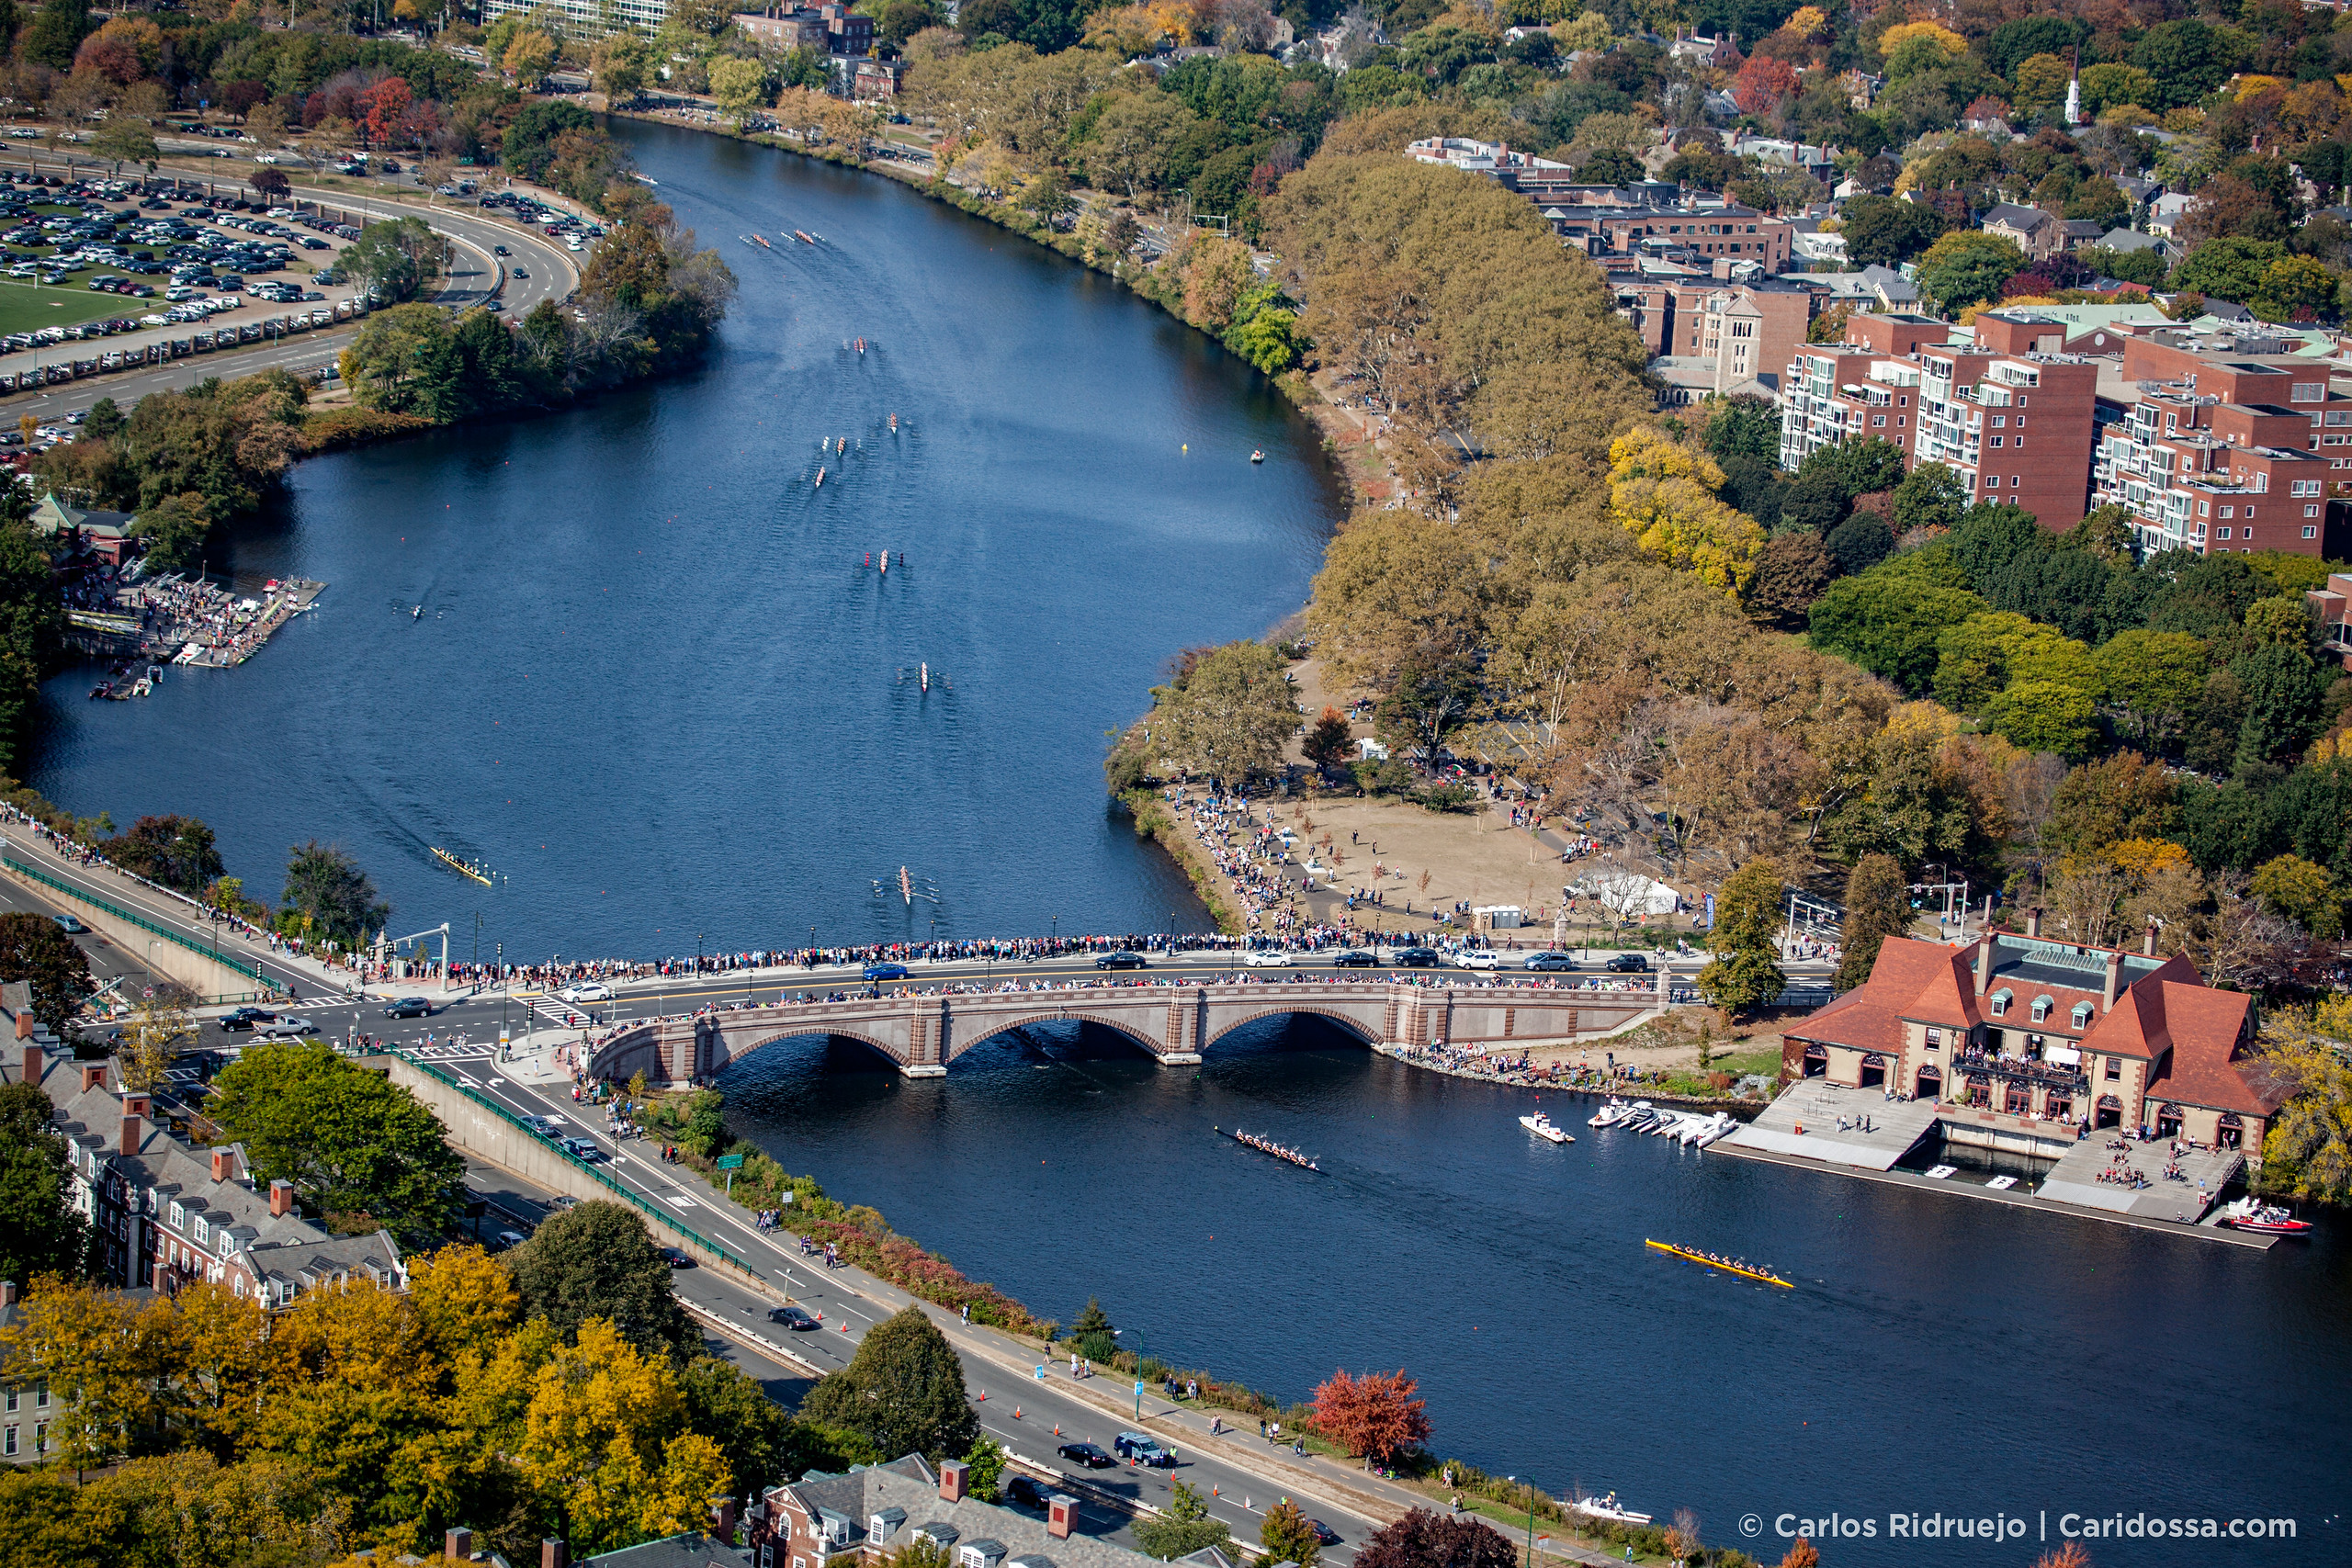 2019 Head Of The Charles Regatta will Generate Over $88 Million in Spending Impact for the Greater Boston Economy